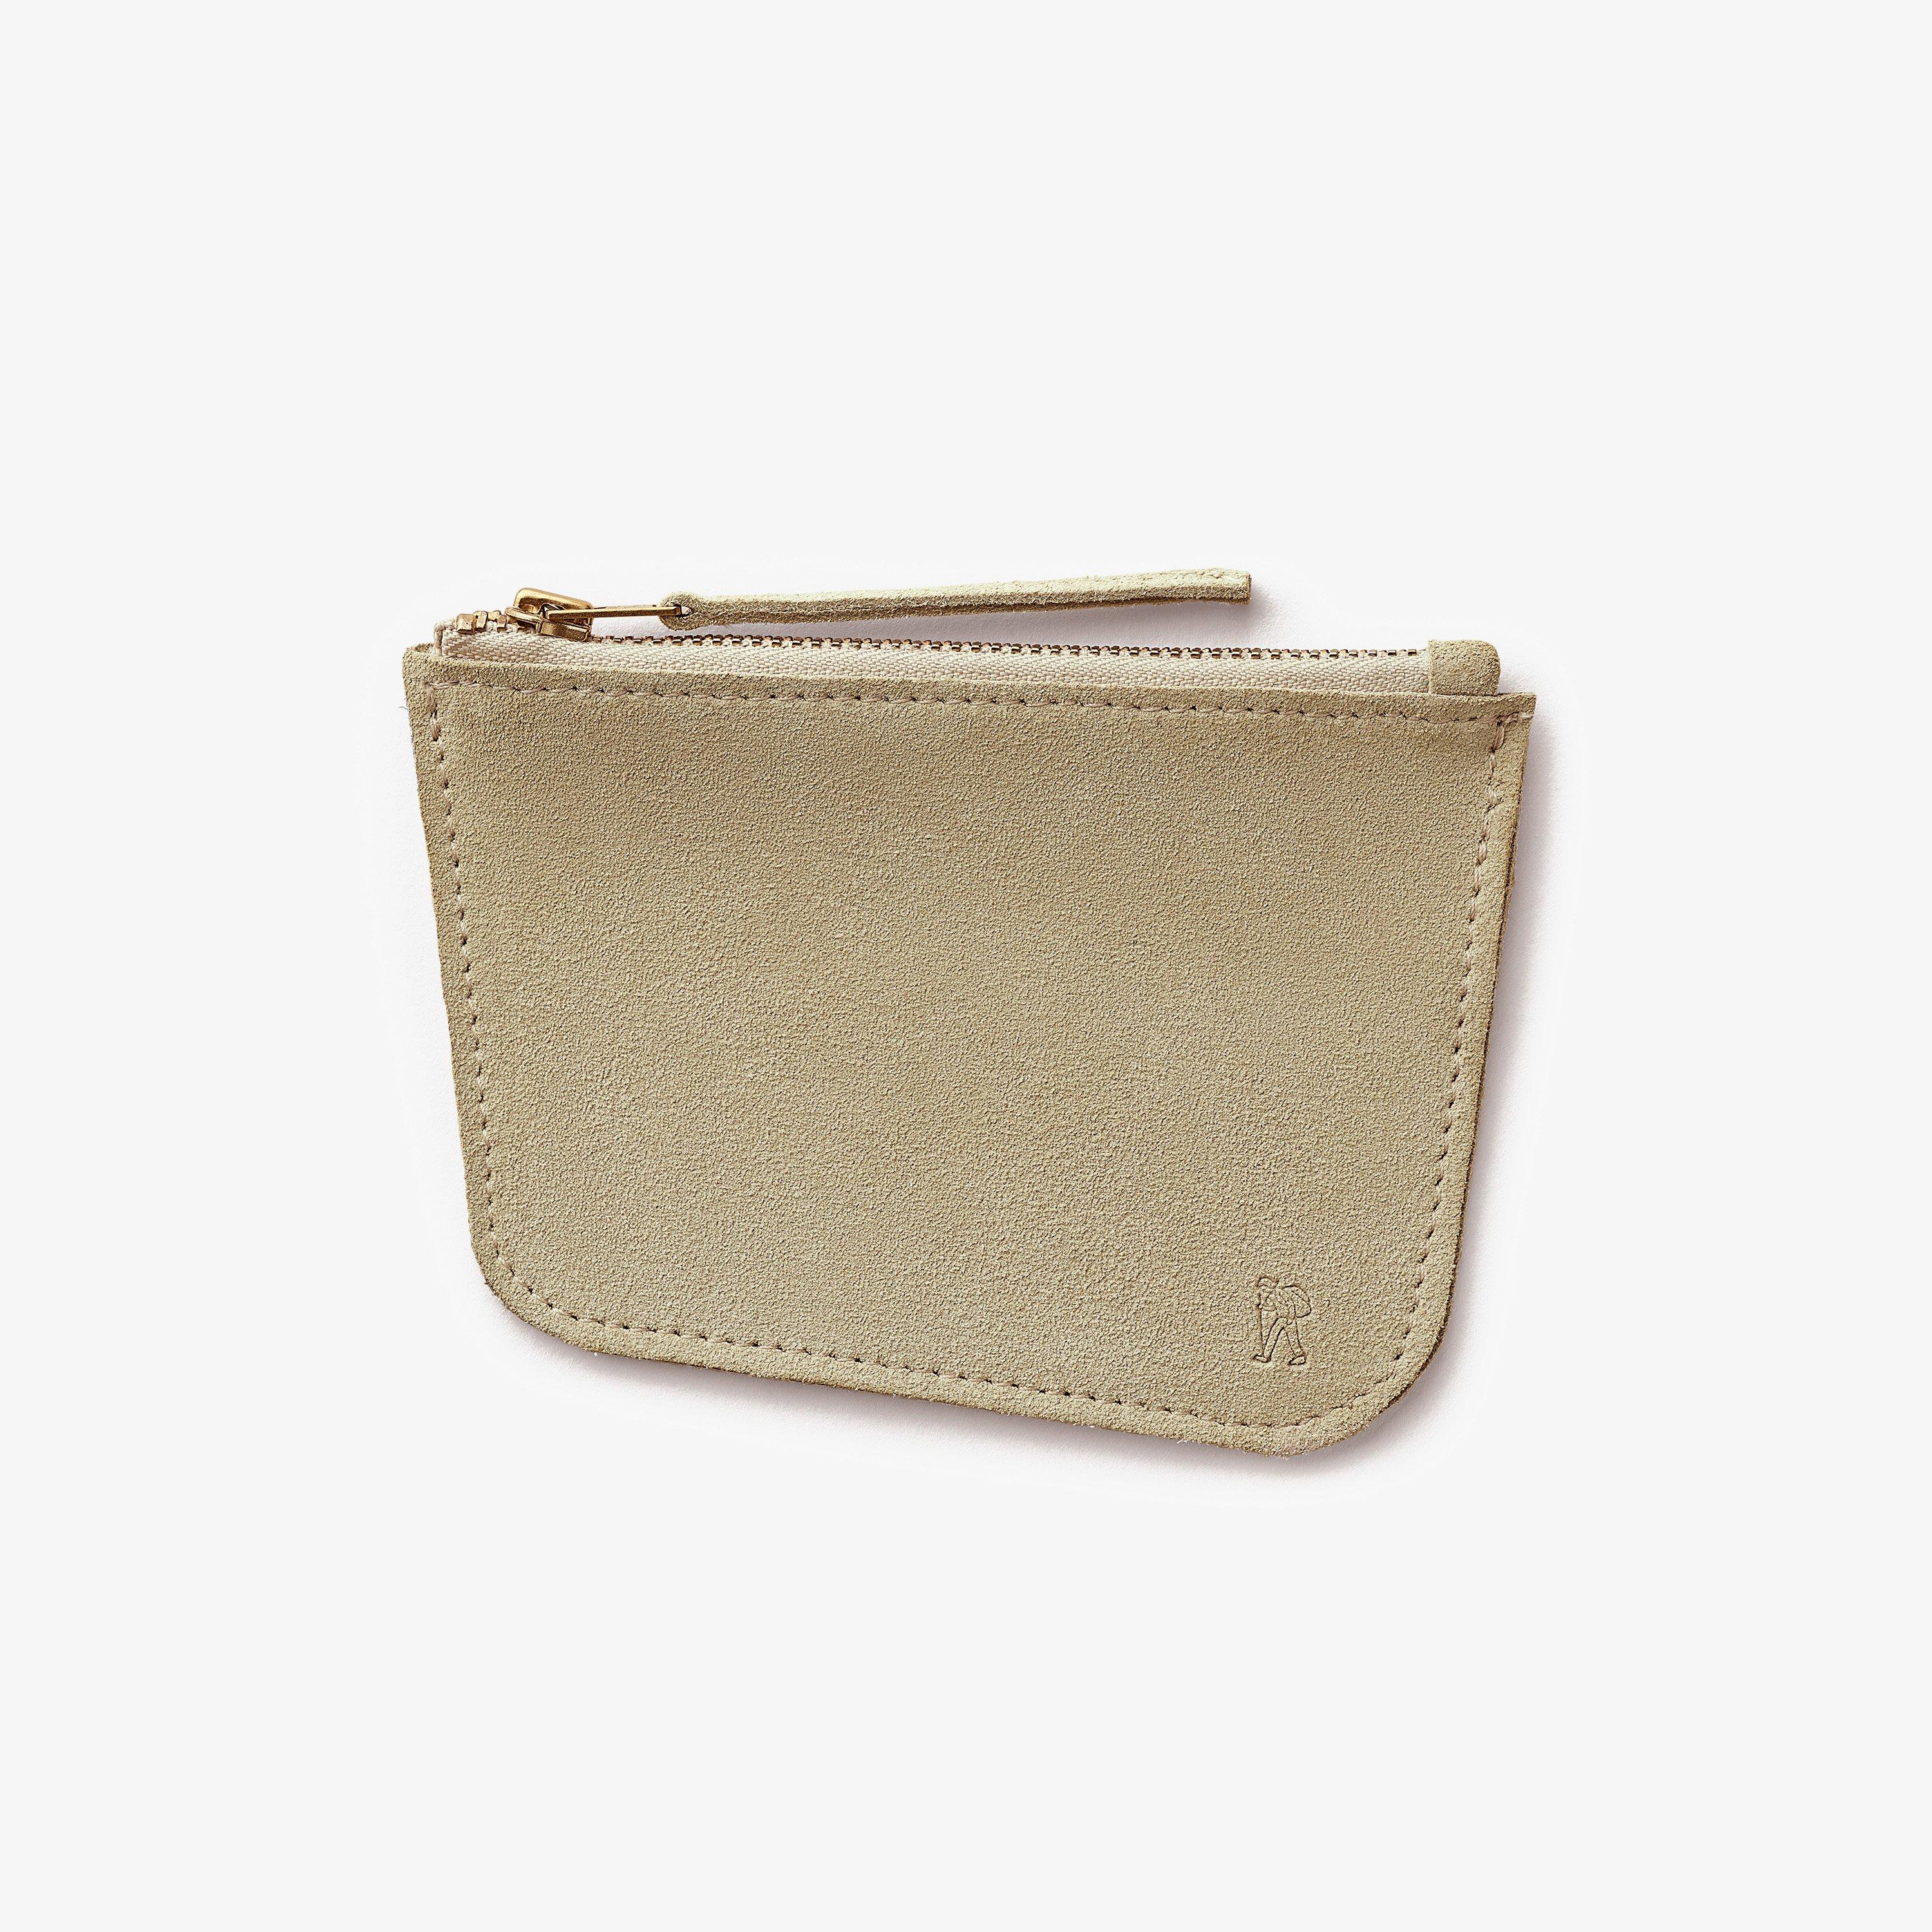 25 Different Types of Wallets for Women and Men (Mega List)